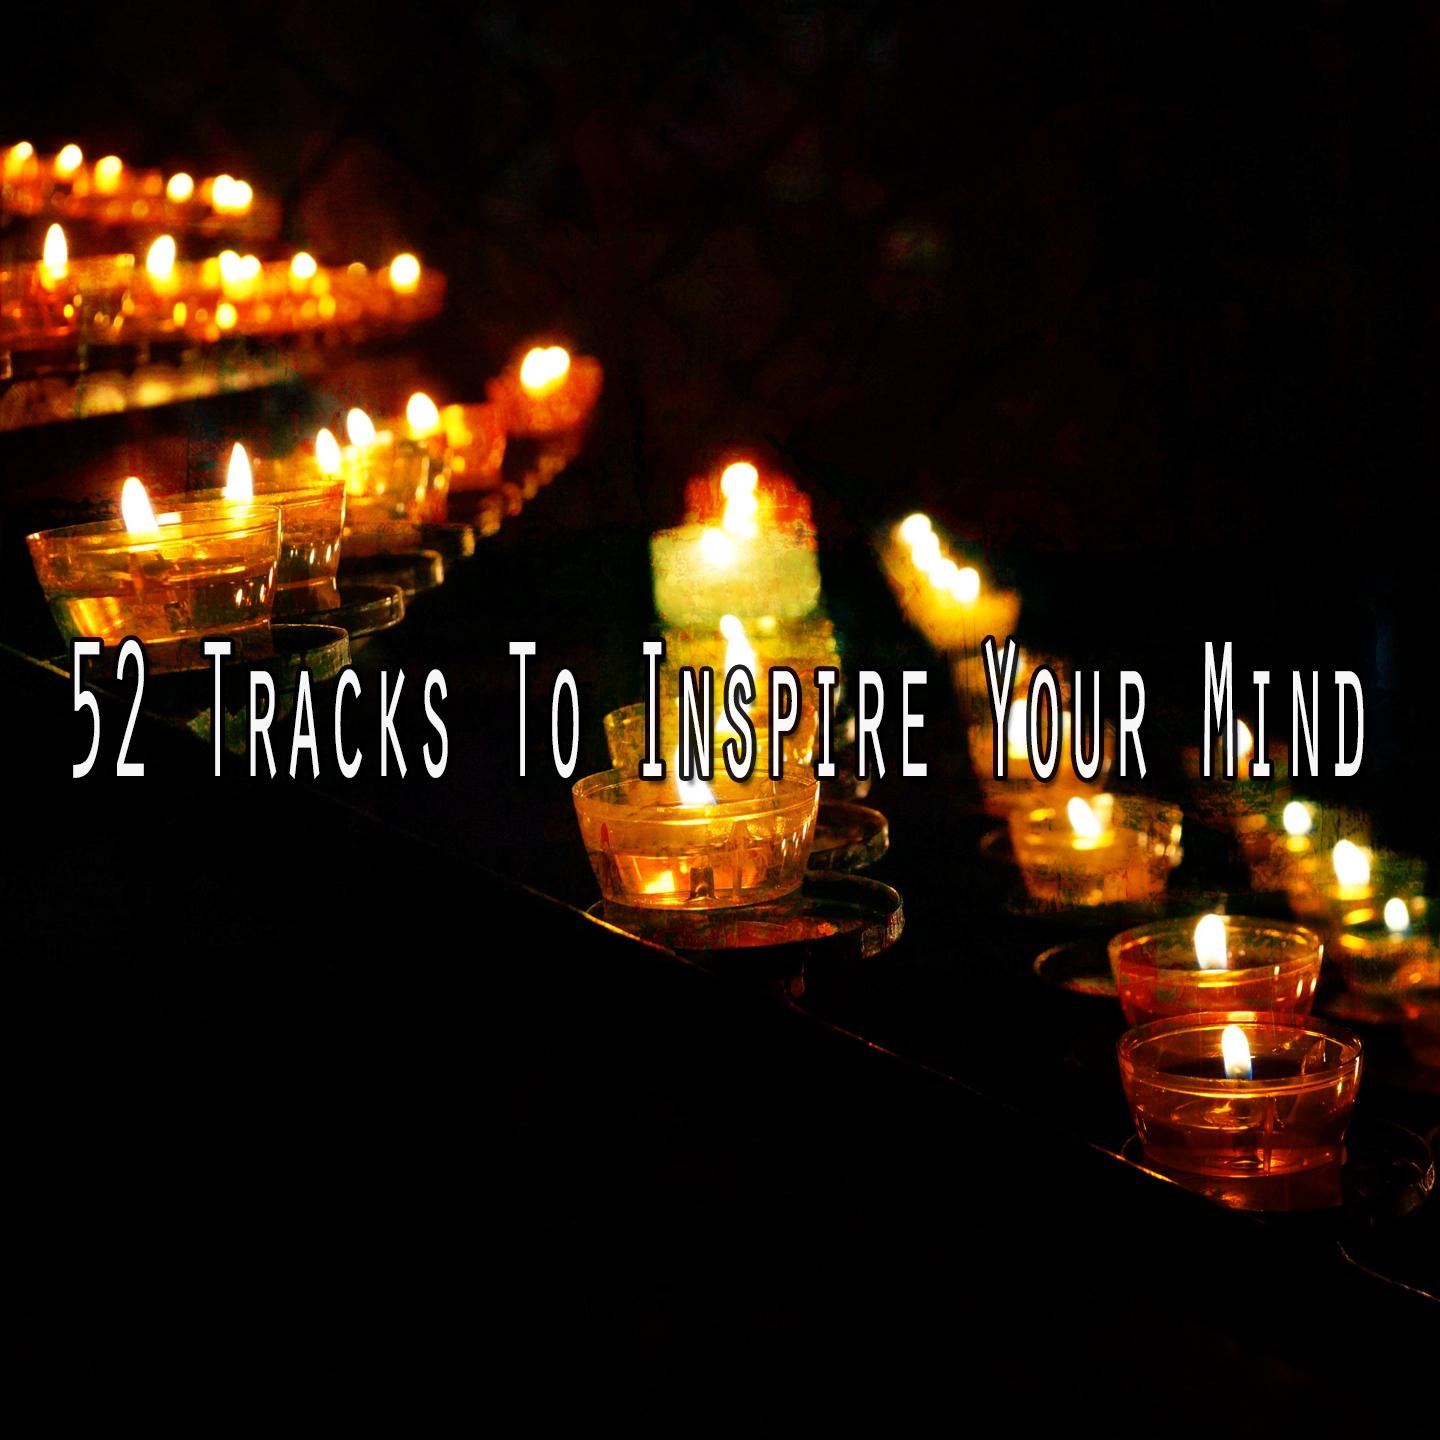 52 Tracks to Inspire Your Mind